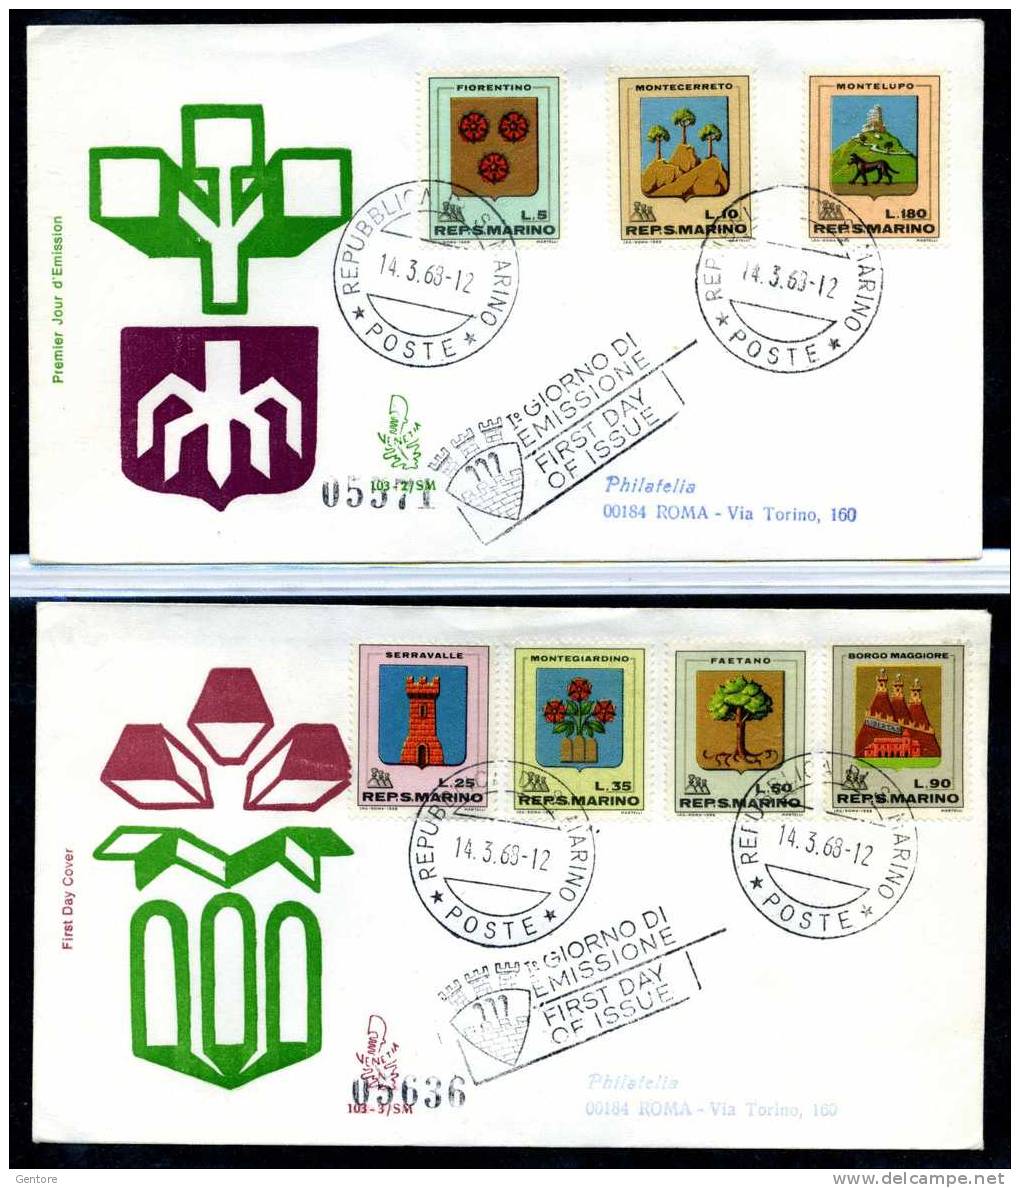 SAN MARINO 1968 Coat Of Arms   On Venetia   FDC With Rome Arrival Cancellation - Briefe U. Dokumente